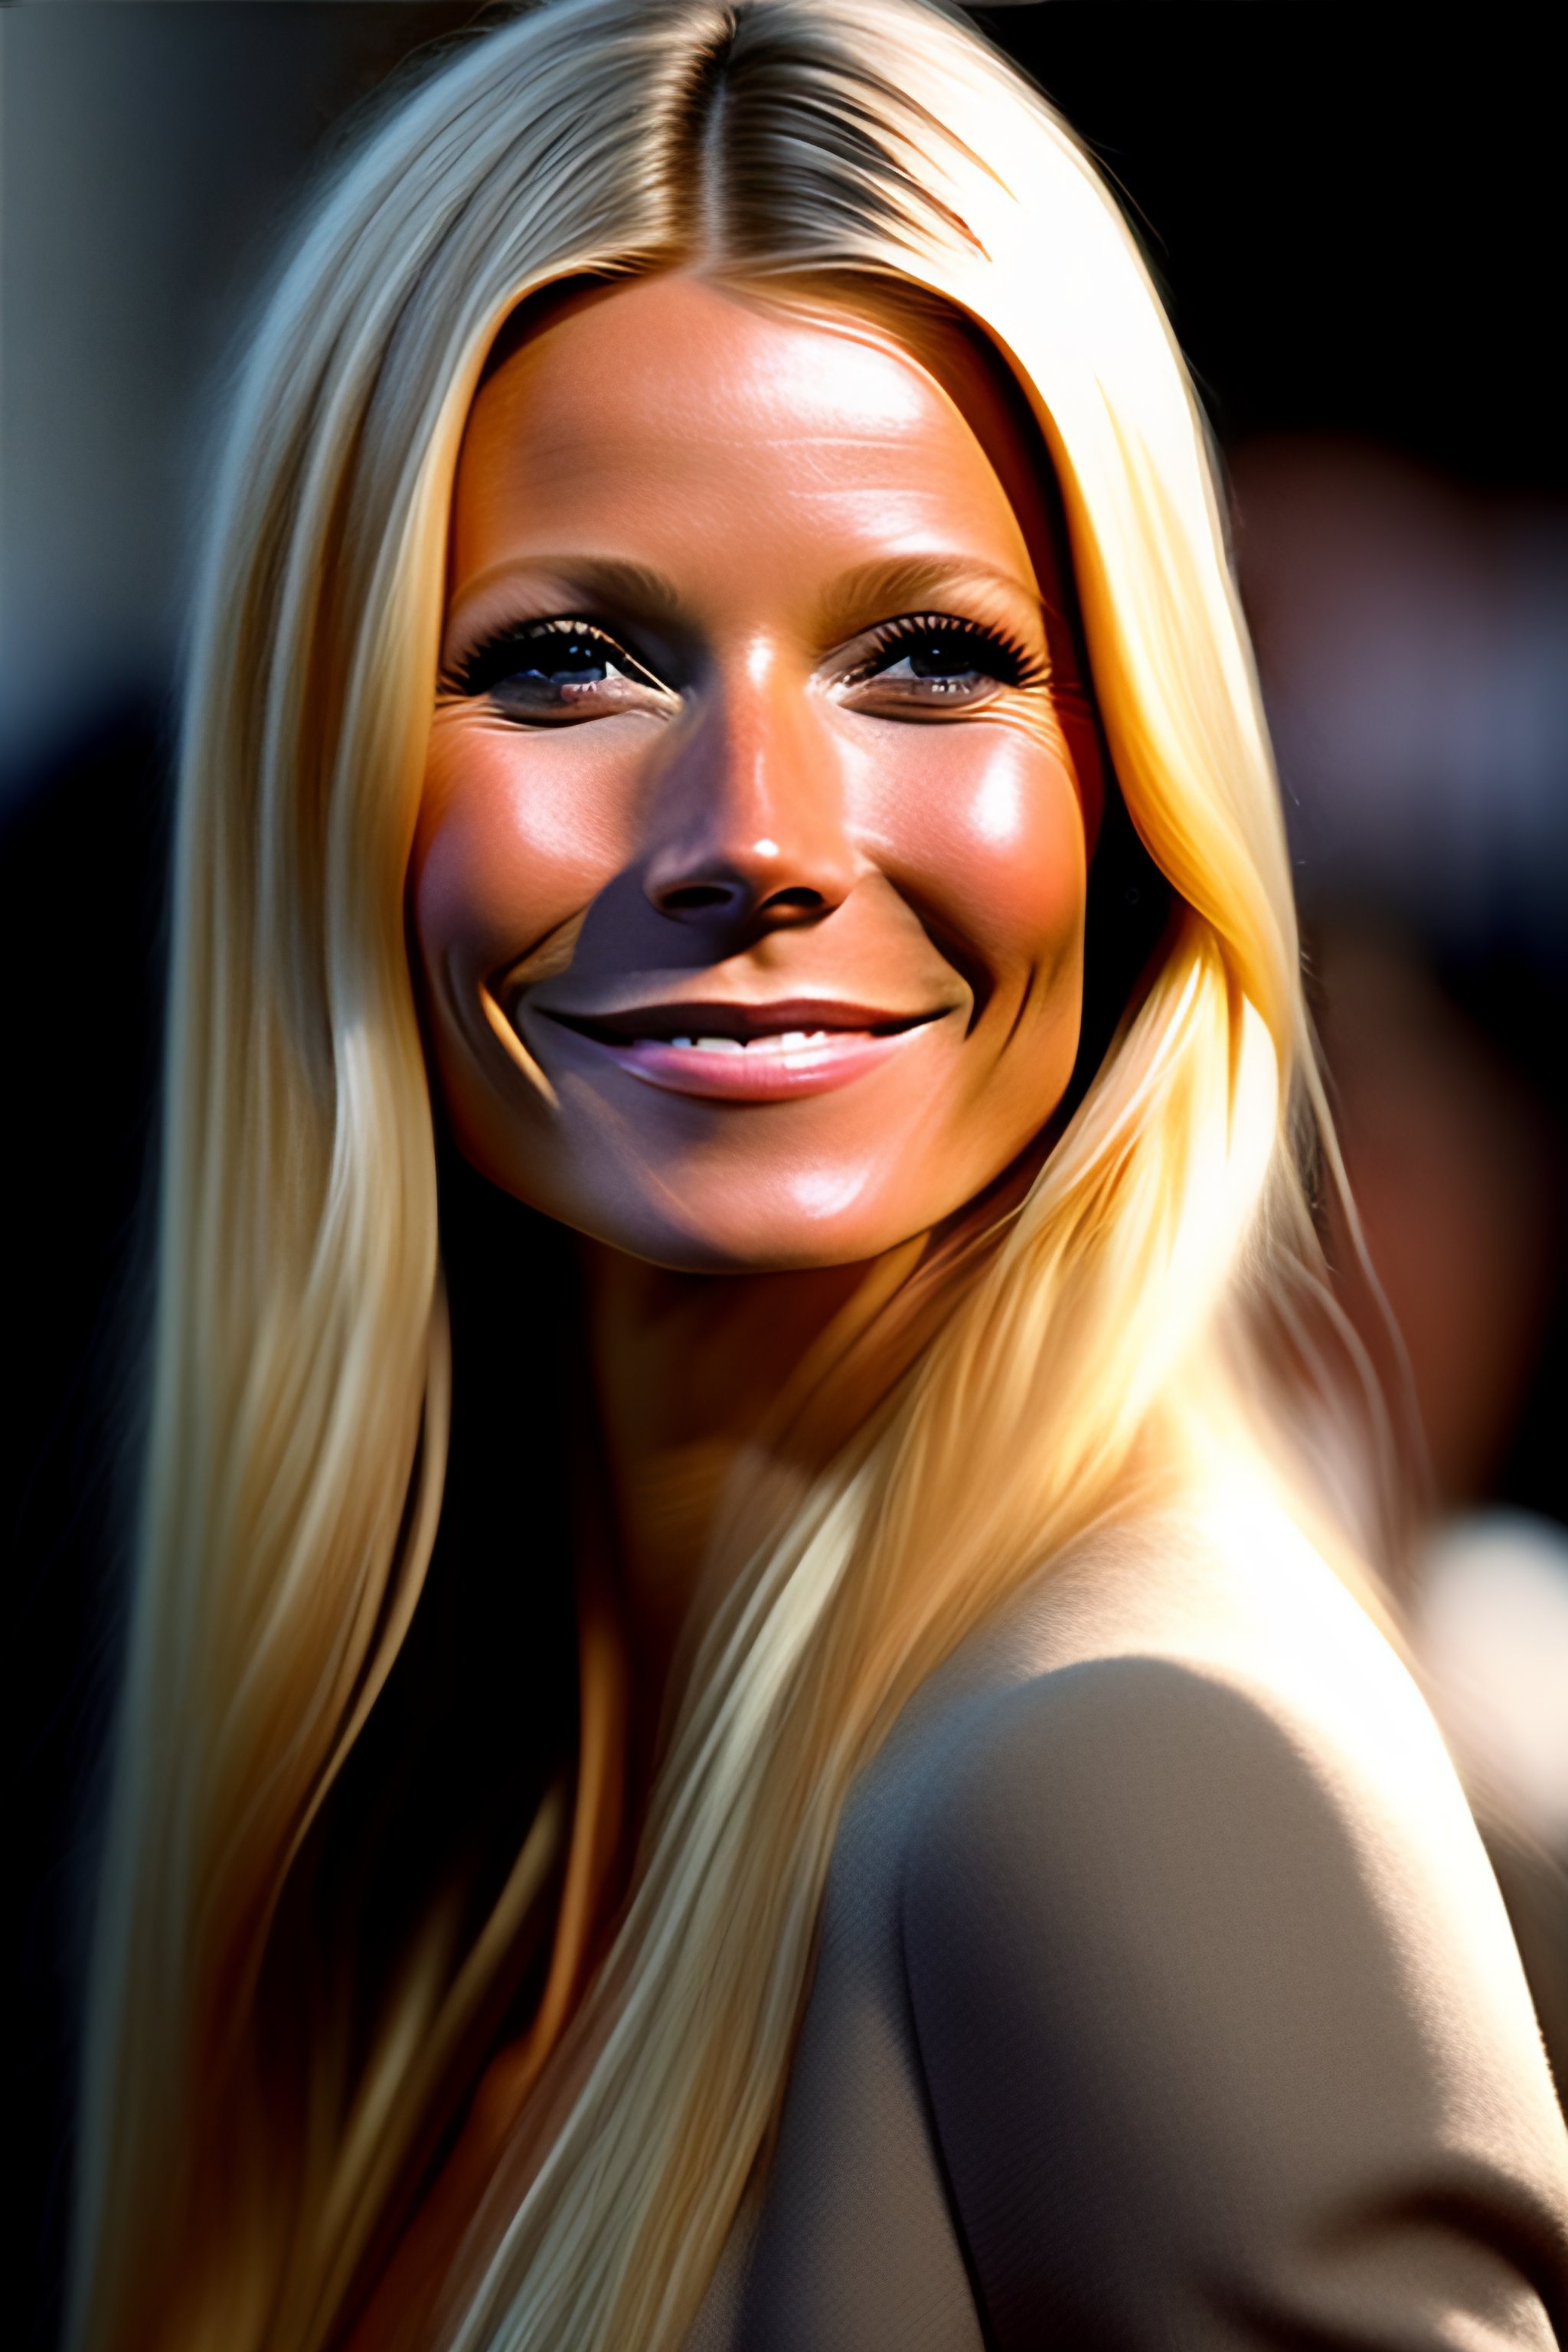 Lexica - Gwyneth paltrow, amazing body, cool outfit, great light, cool pose